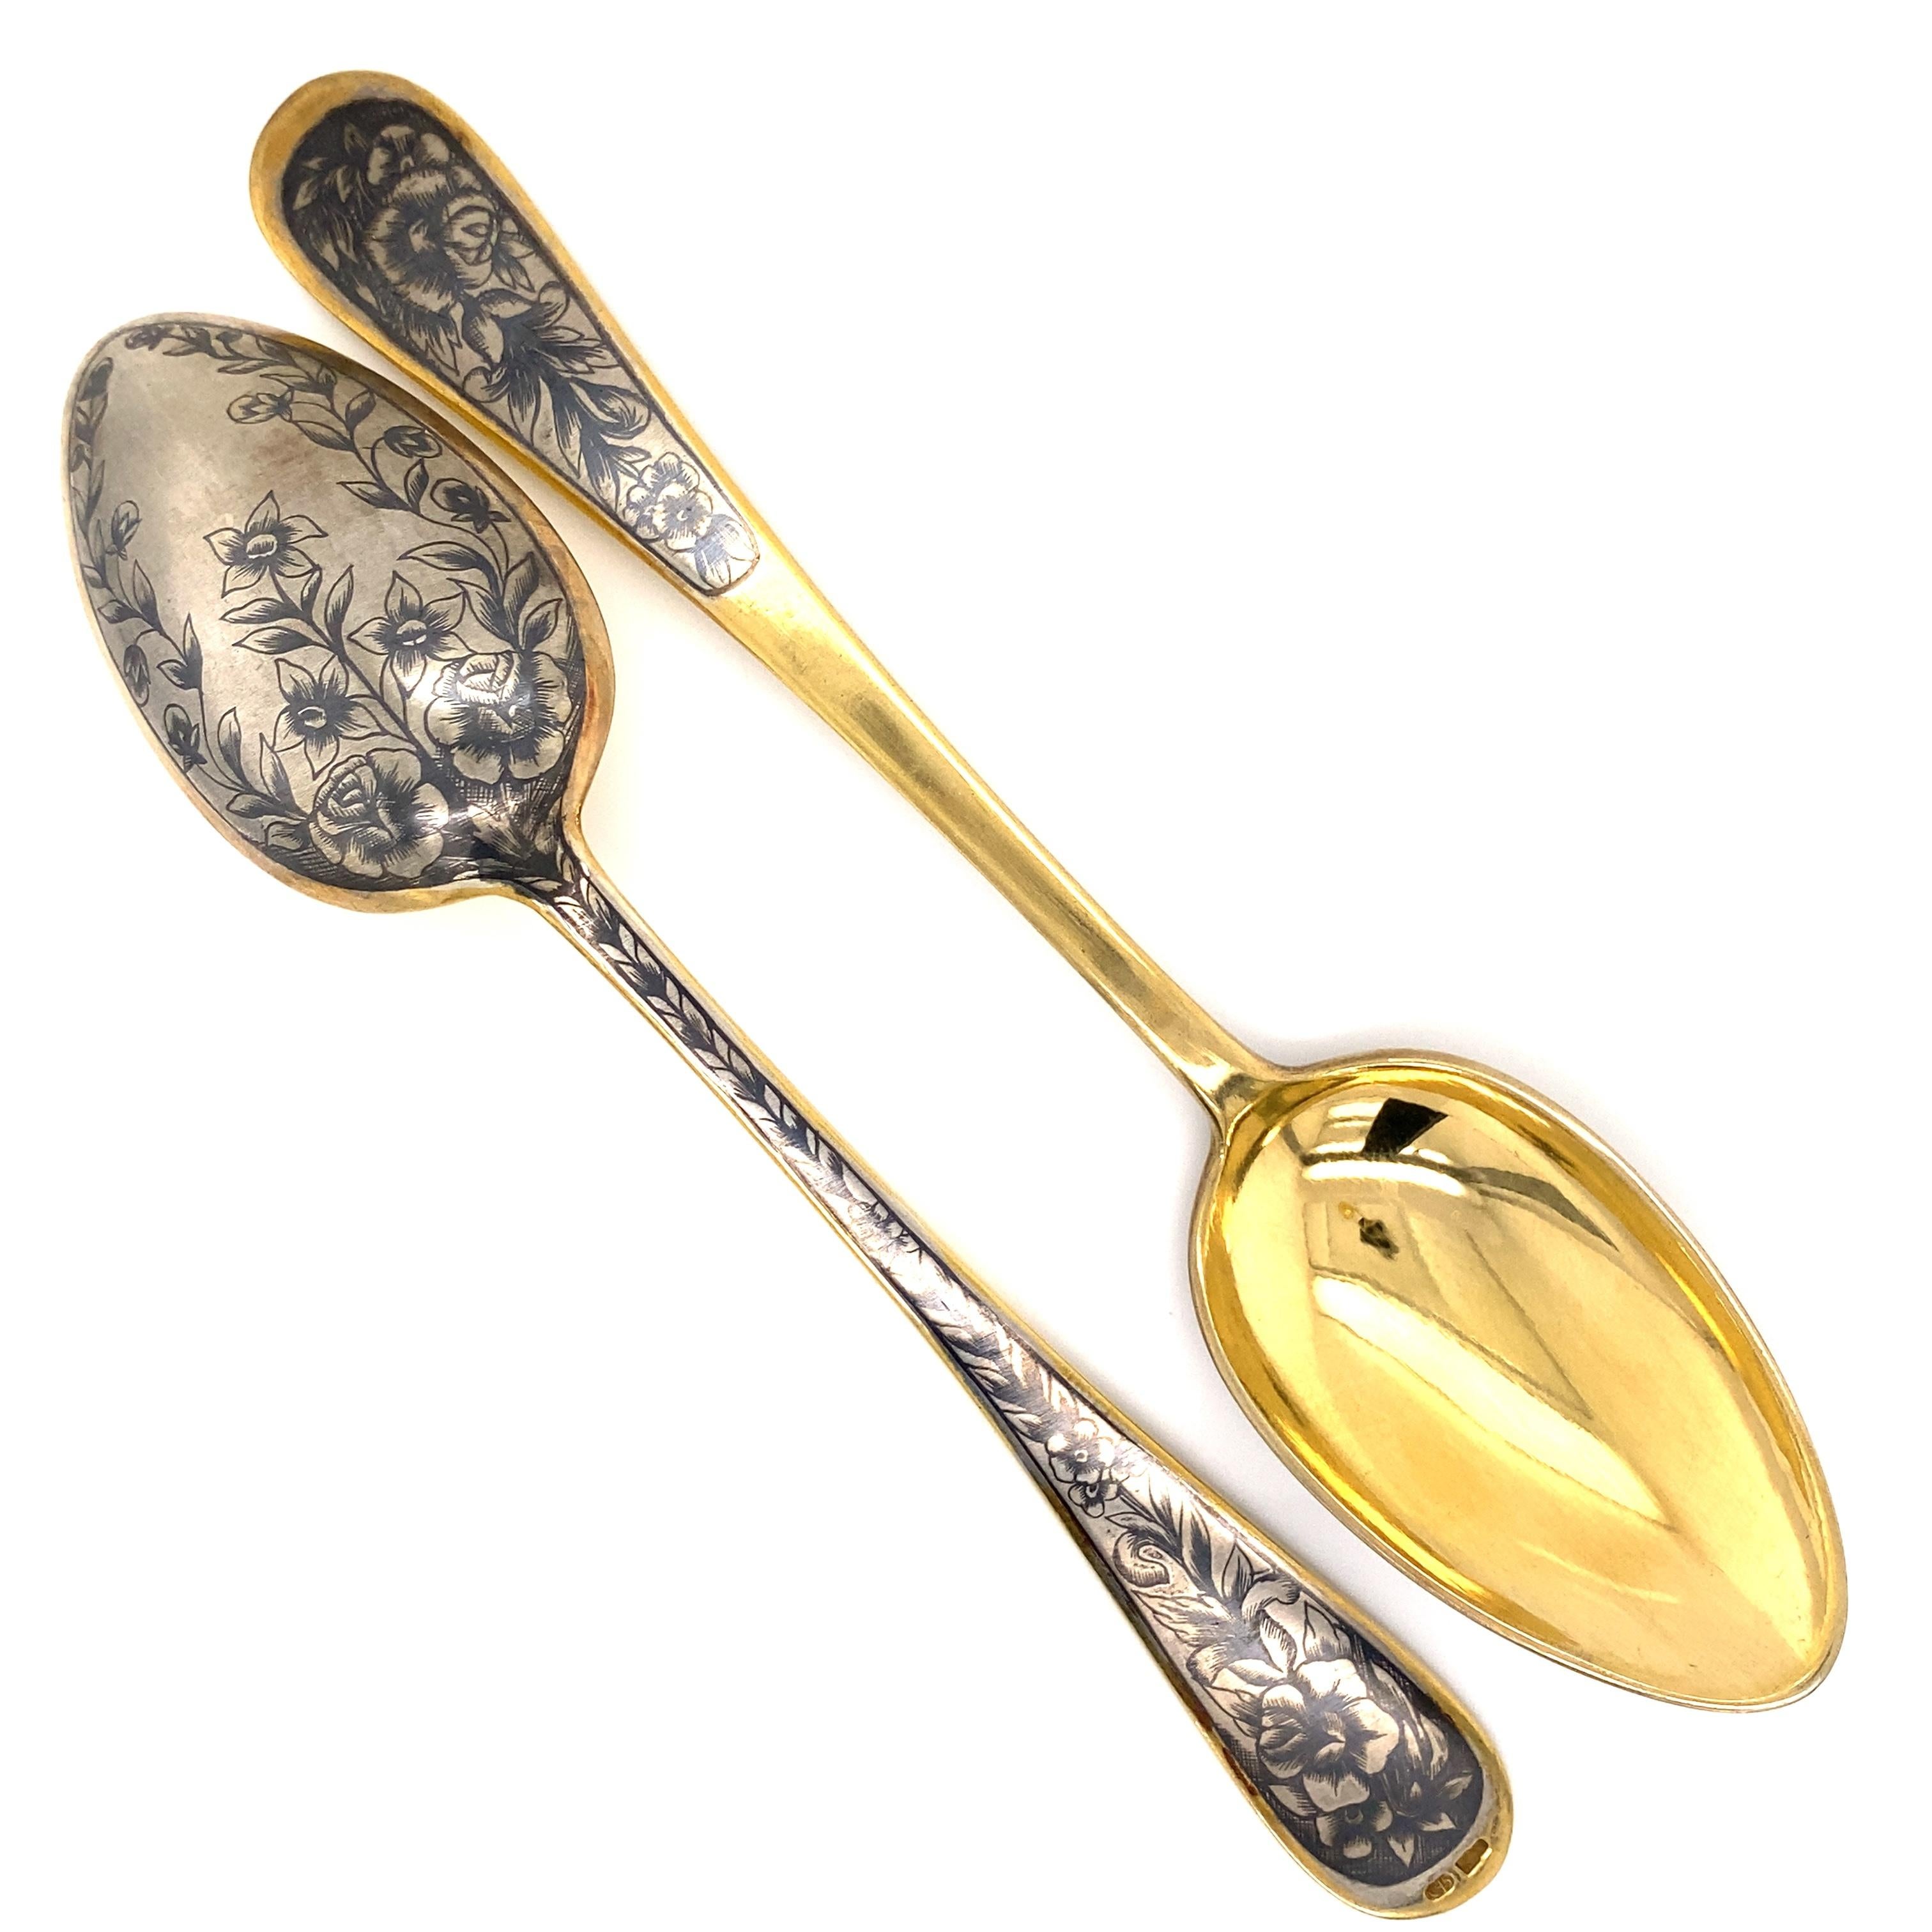 Beautiful Set of 6 Russian niello enamel gold plated 900 silver spoons. Each spoon measuring approx. 6.5” x 1.36”. Approx. Total weight: 266.50g. A perfect compliment to grace your tea party or table setting!.
 